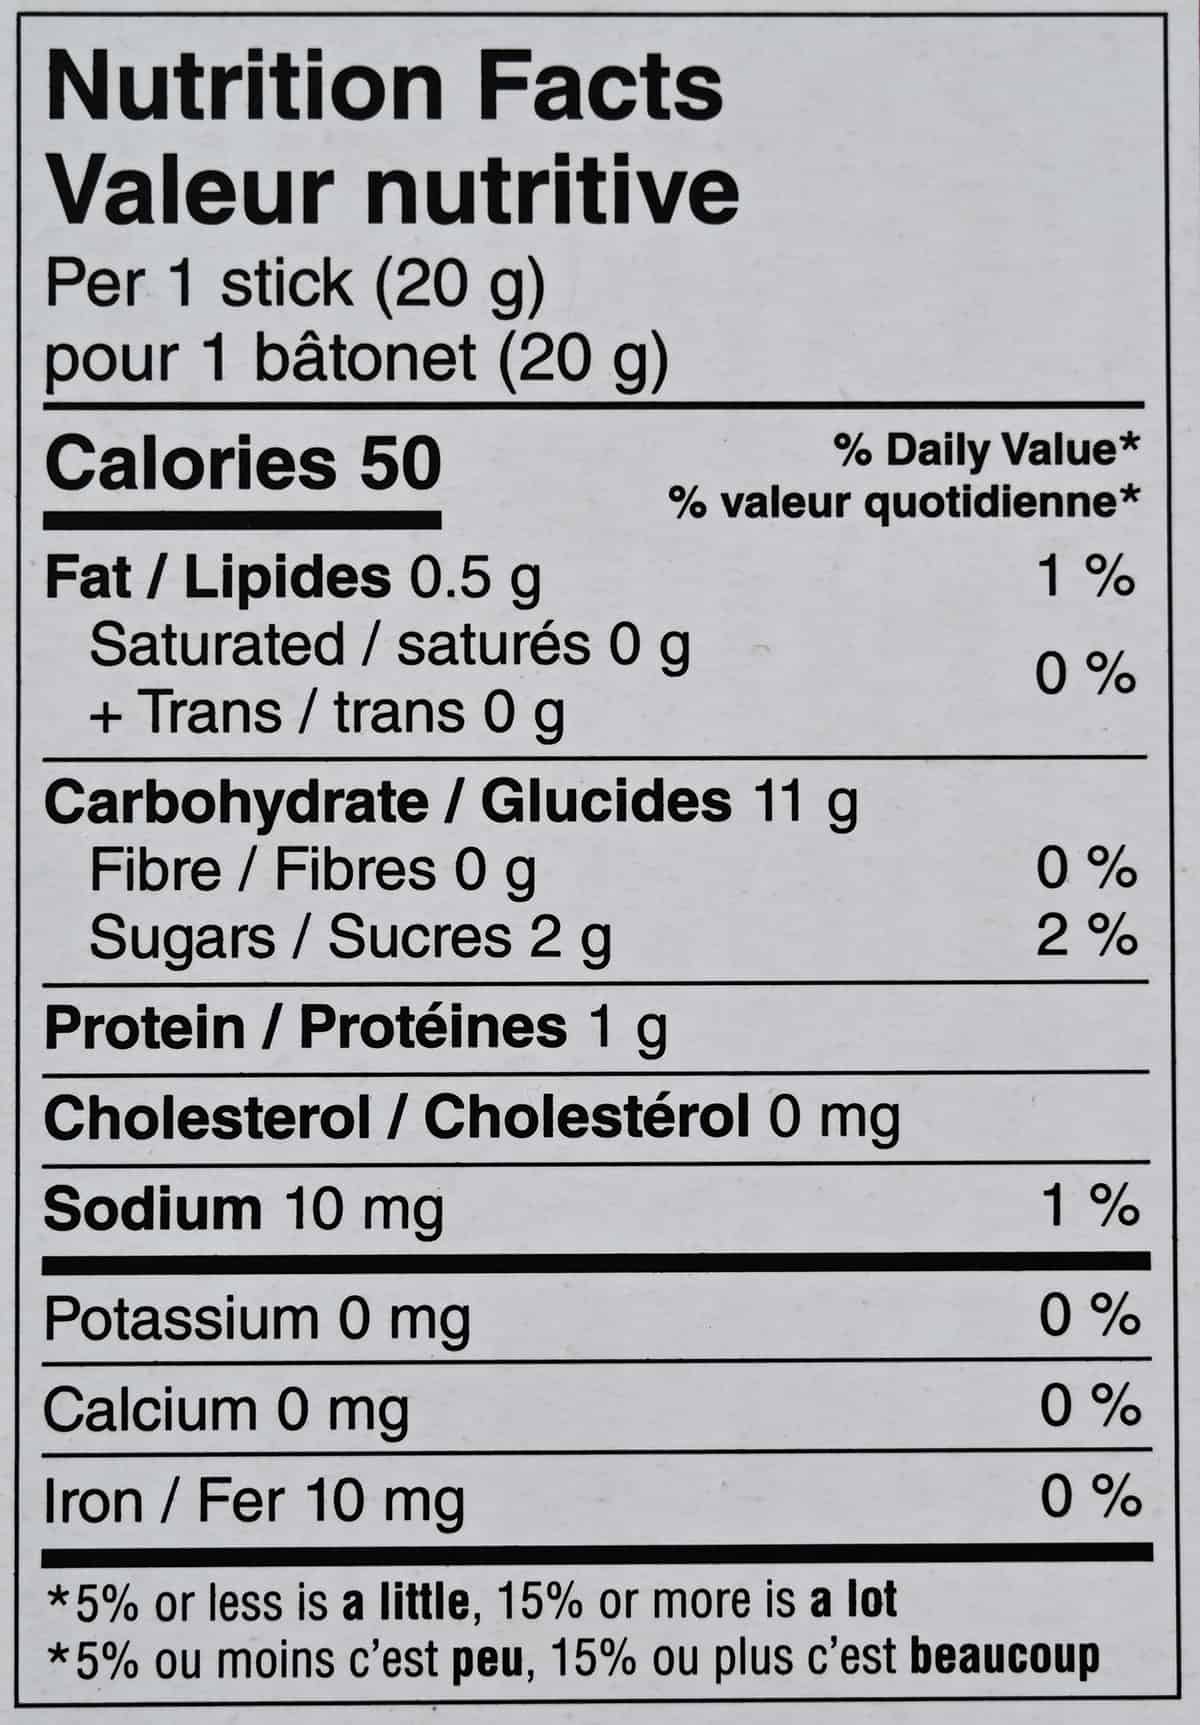 Image of the nutrition facts for the jelly sticks from the back of the box.